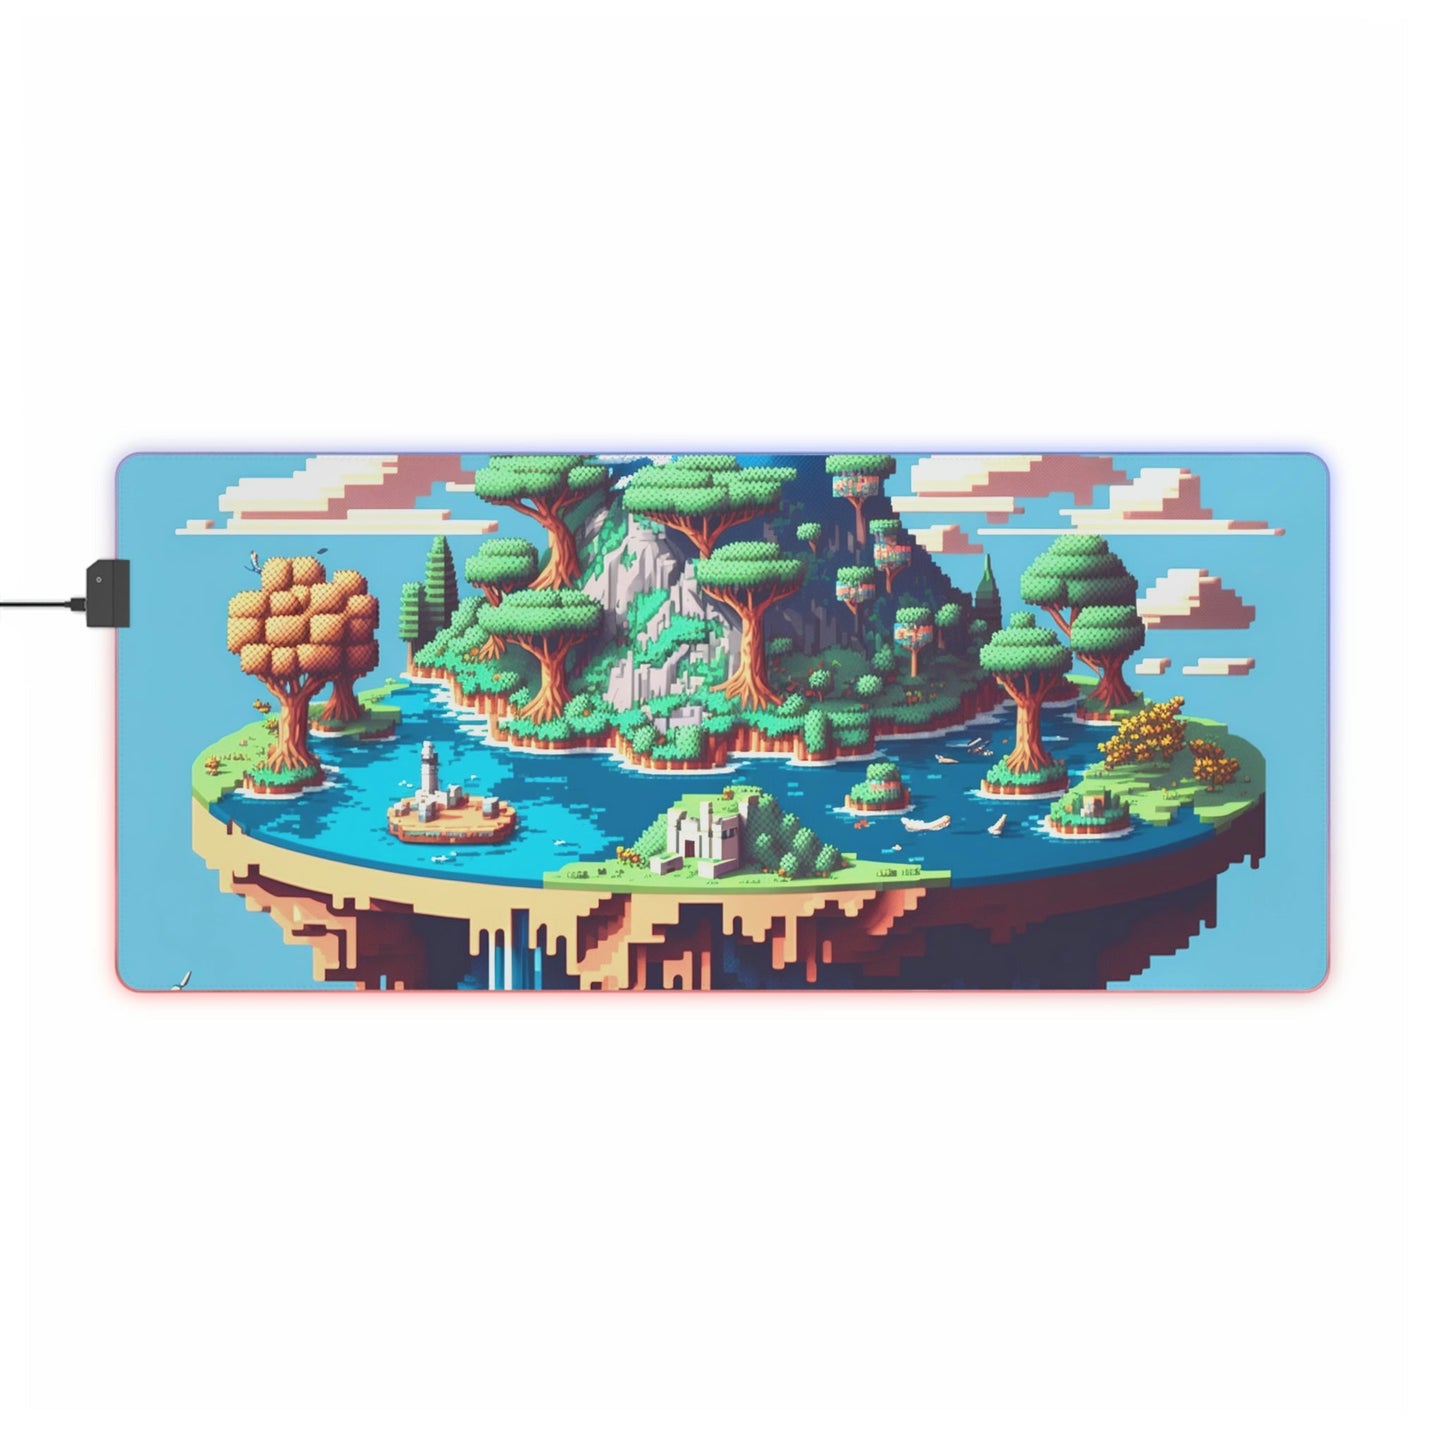 2 Pixel Art Flat World LED Gaming Mouse Pad with 14